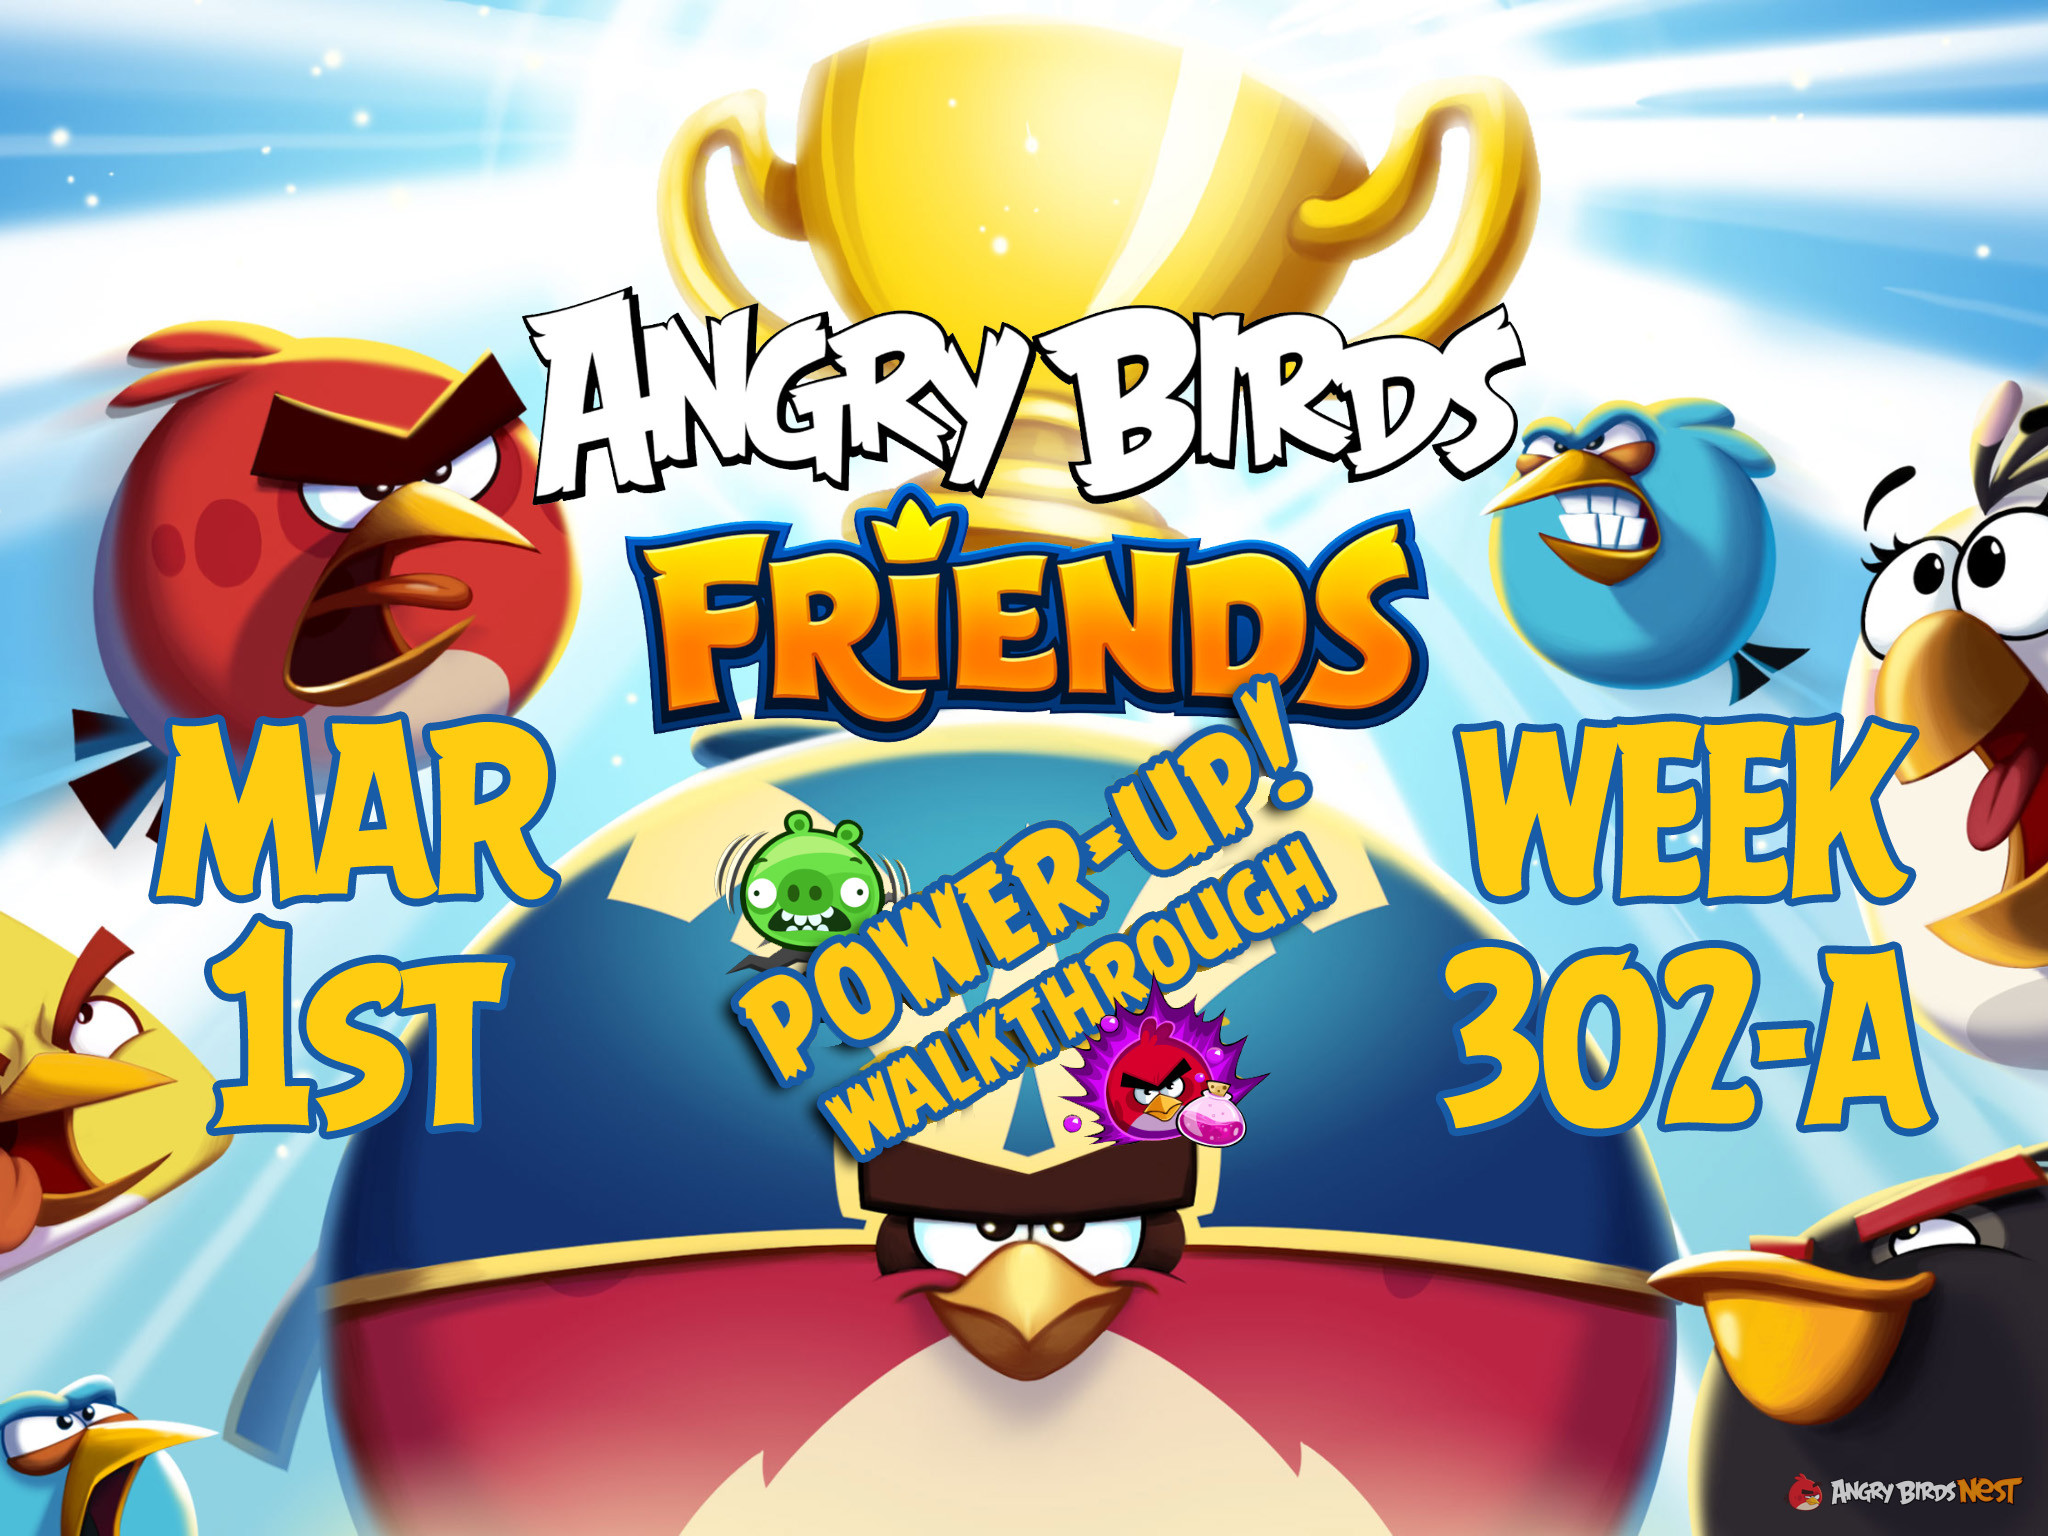 Angry Birds Friends Tournament Week 302-A Feature Image PU